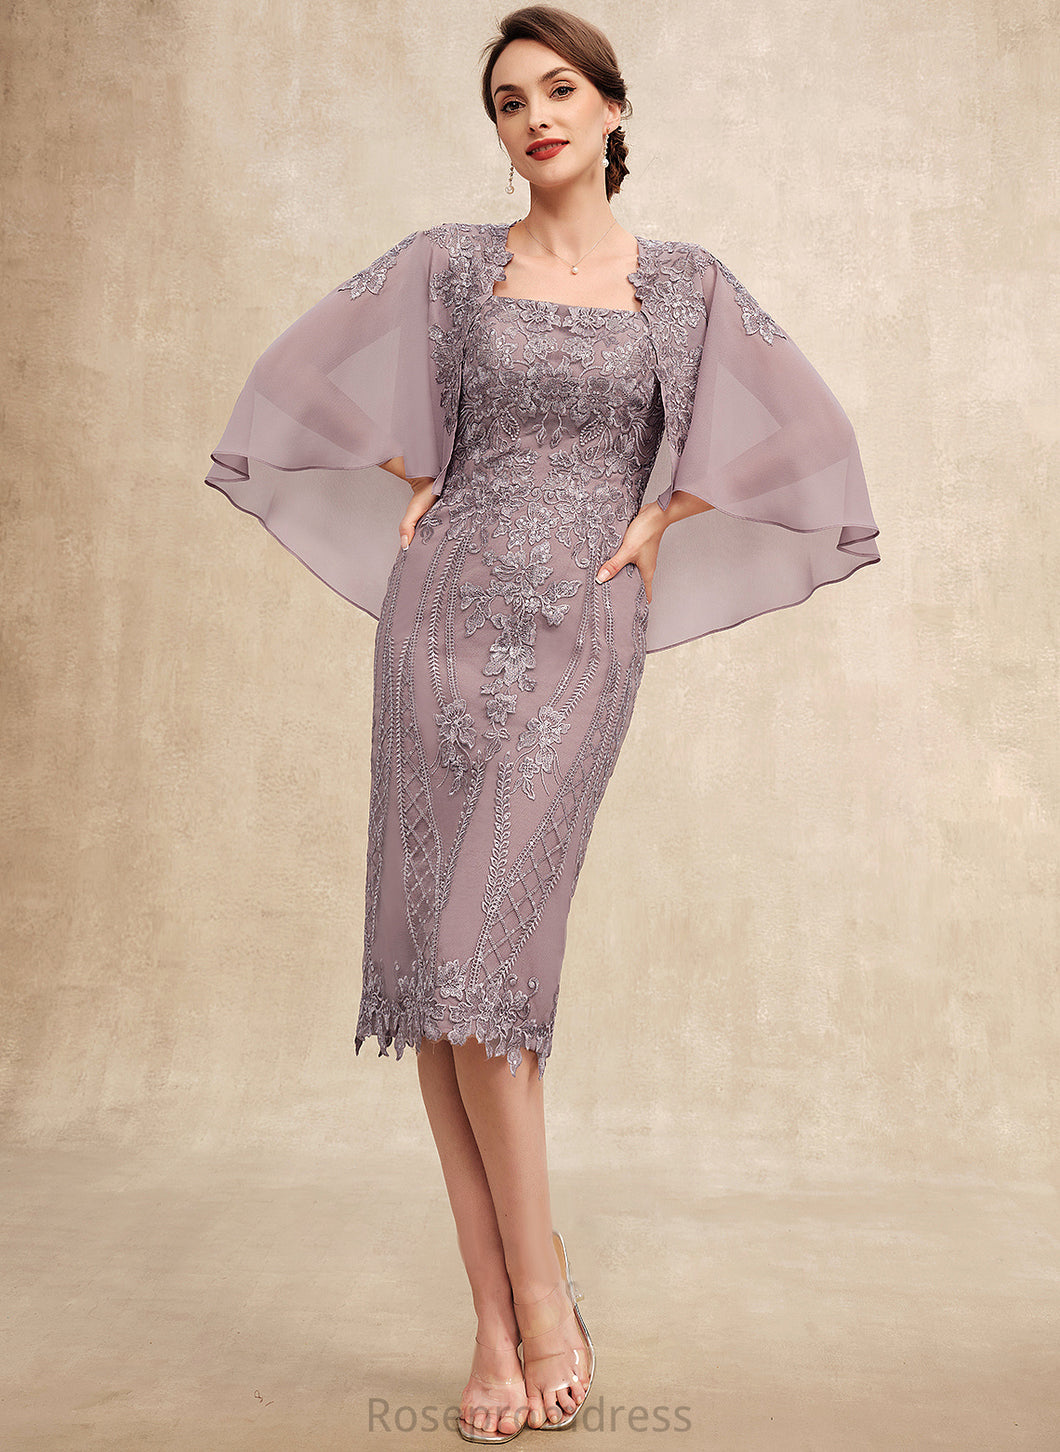 With Neckline Bride Sequins Chiffon of the Sheath/Column Alice Mother of the Bride Dresses Square Knee-Length Mother Dress Lace